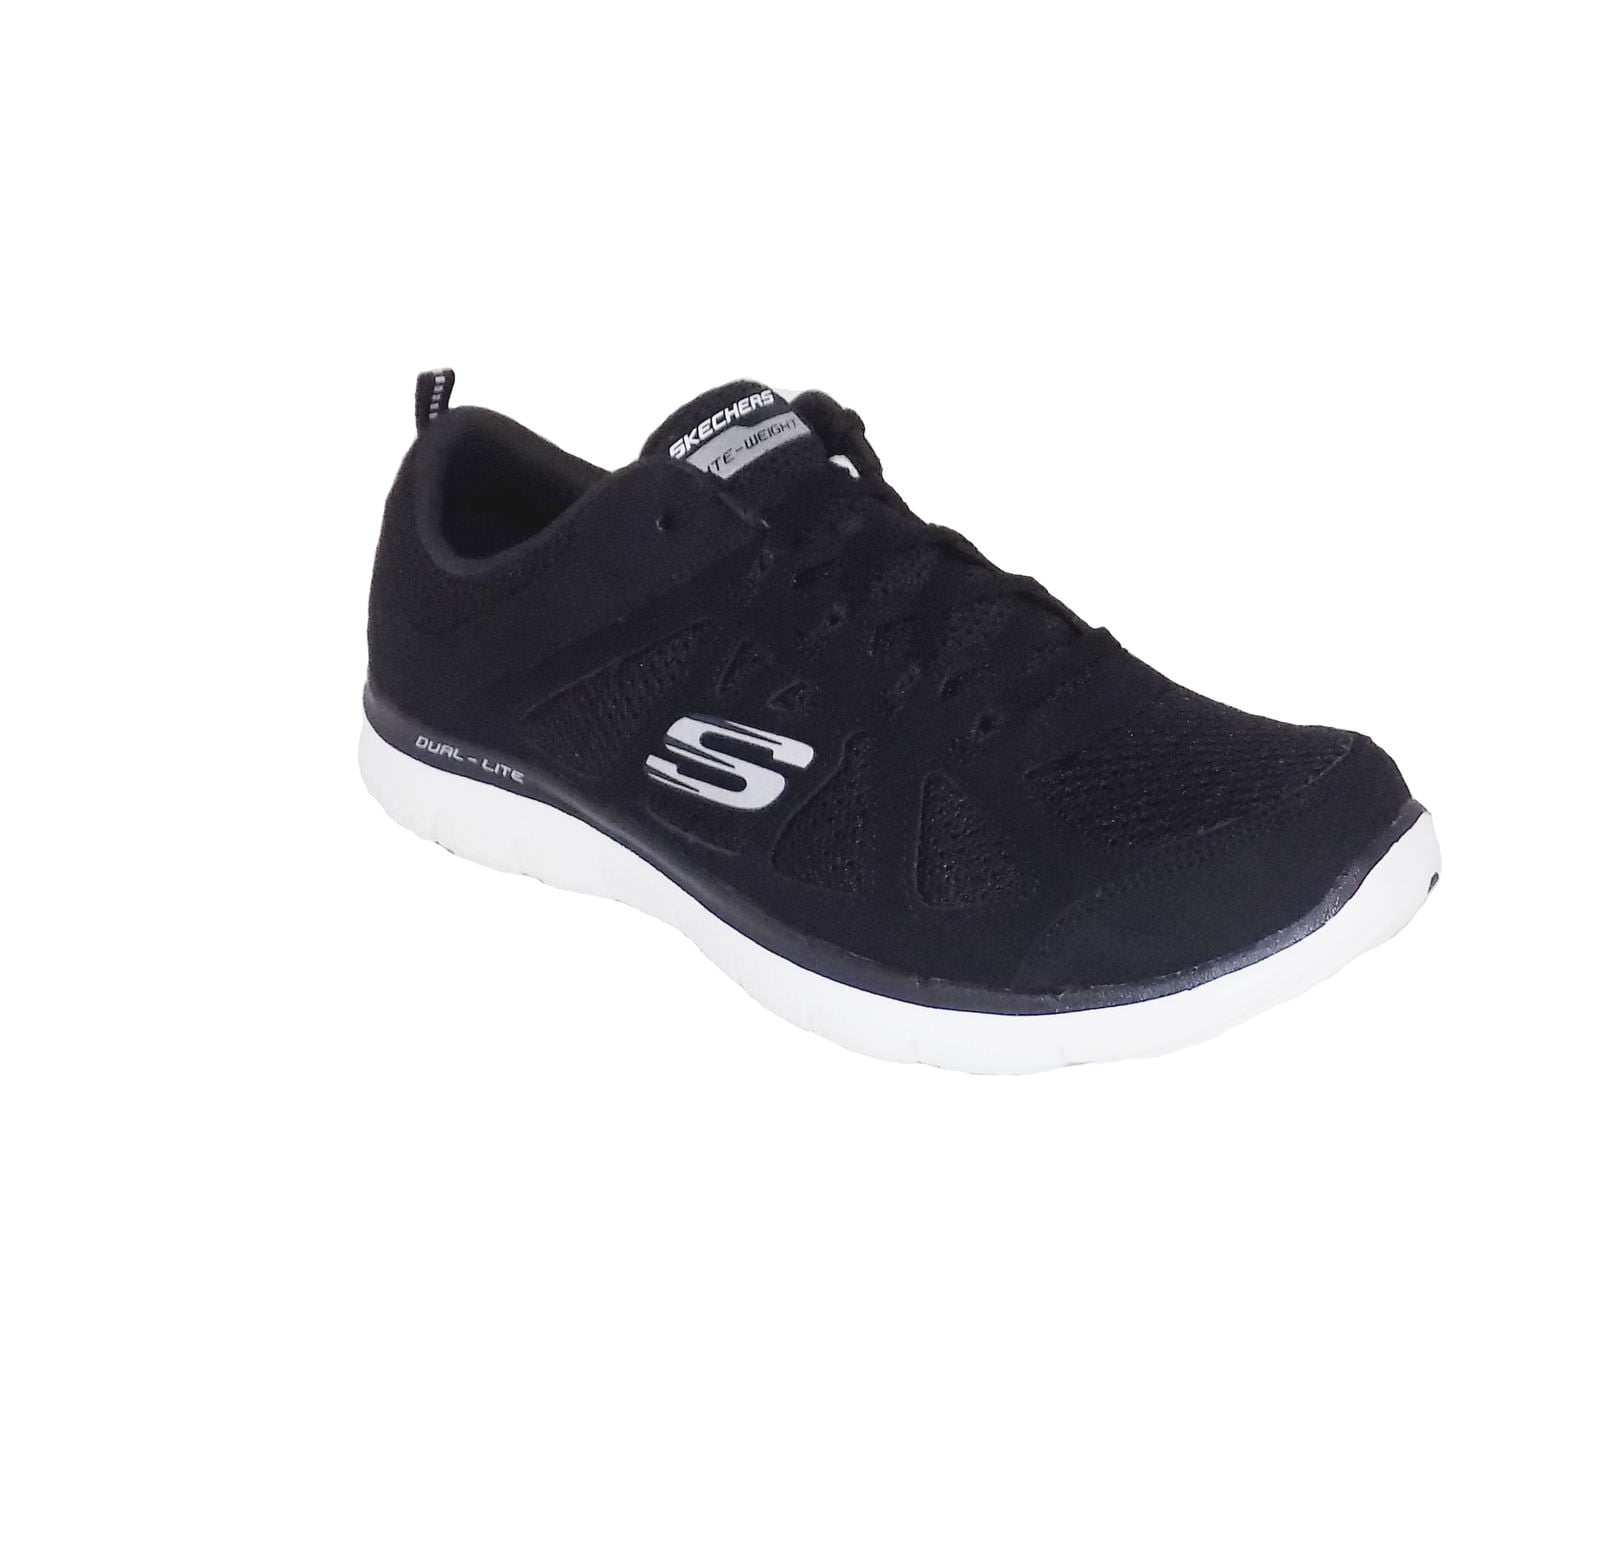 skechers flex appeal 2.0 black and white